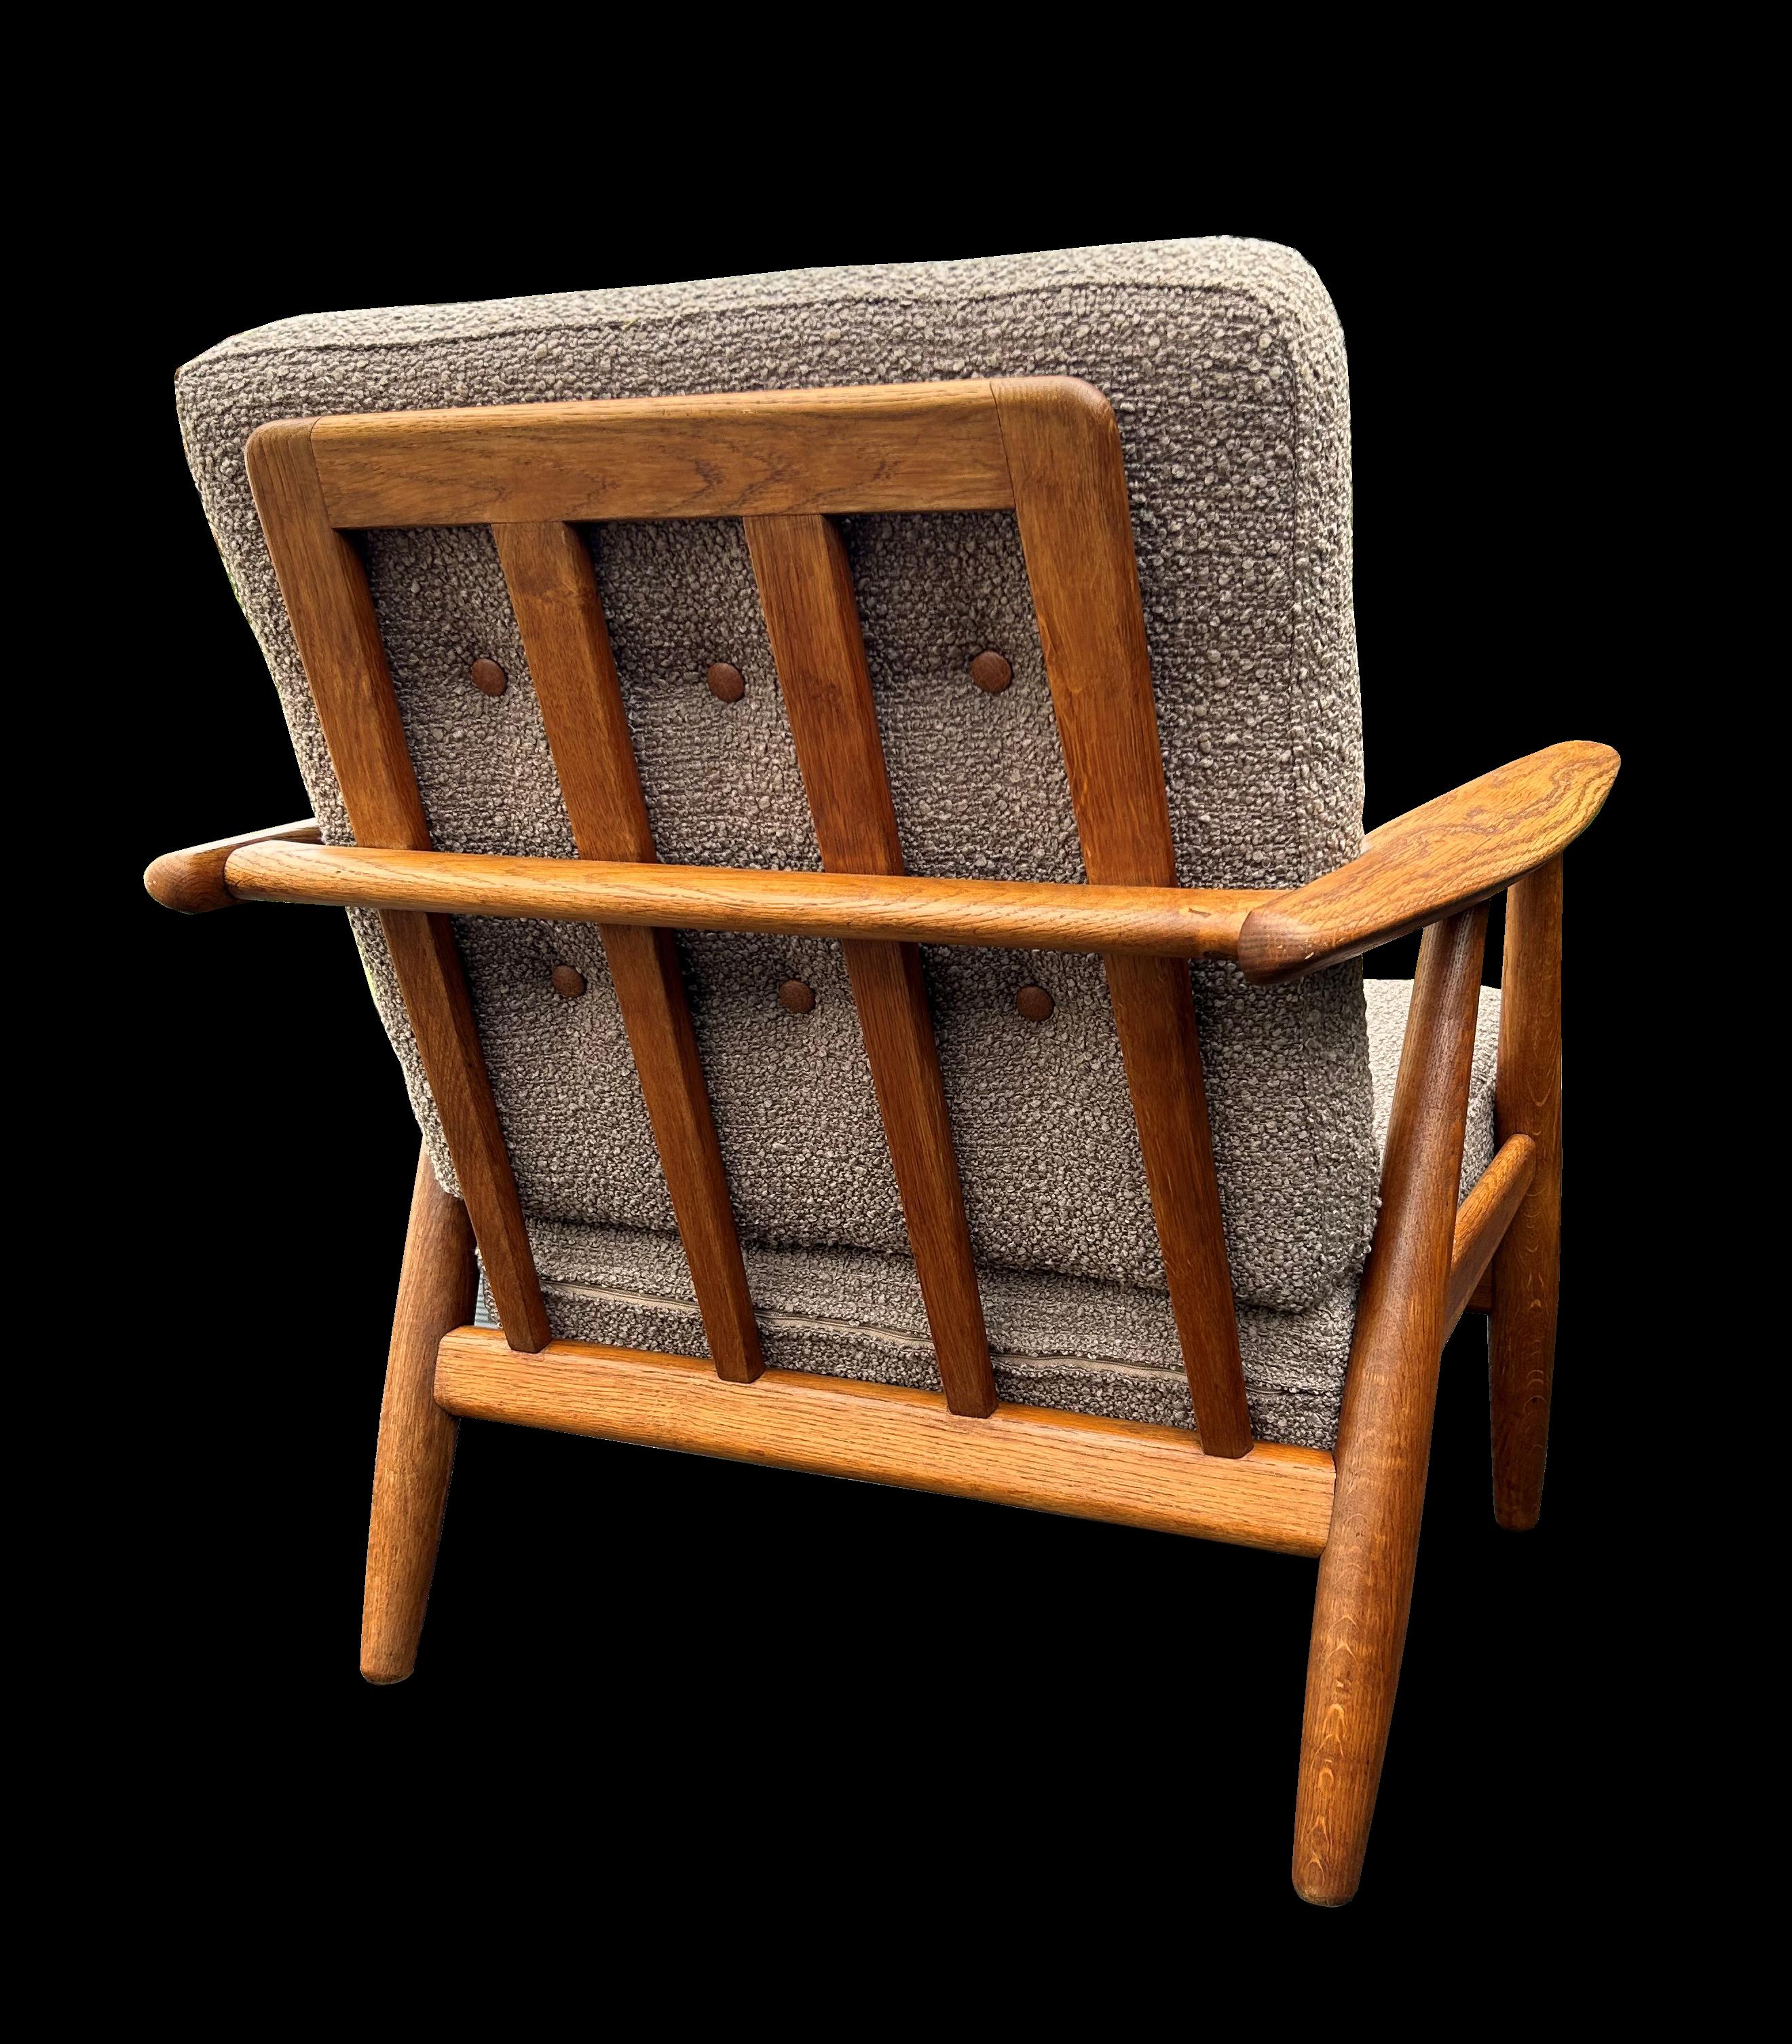 A very nice example of this classic chair, freshly uphosltered in Mocha coloured Boucle fabric.
The frame in Oak and  all in great condition.